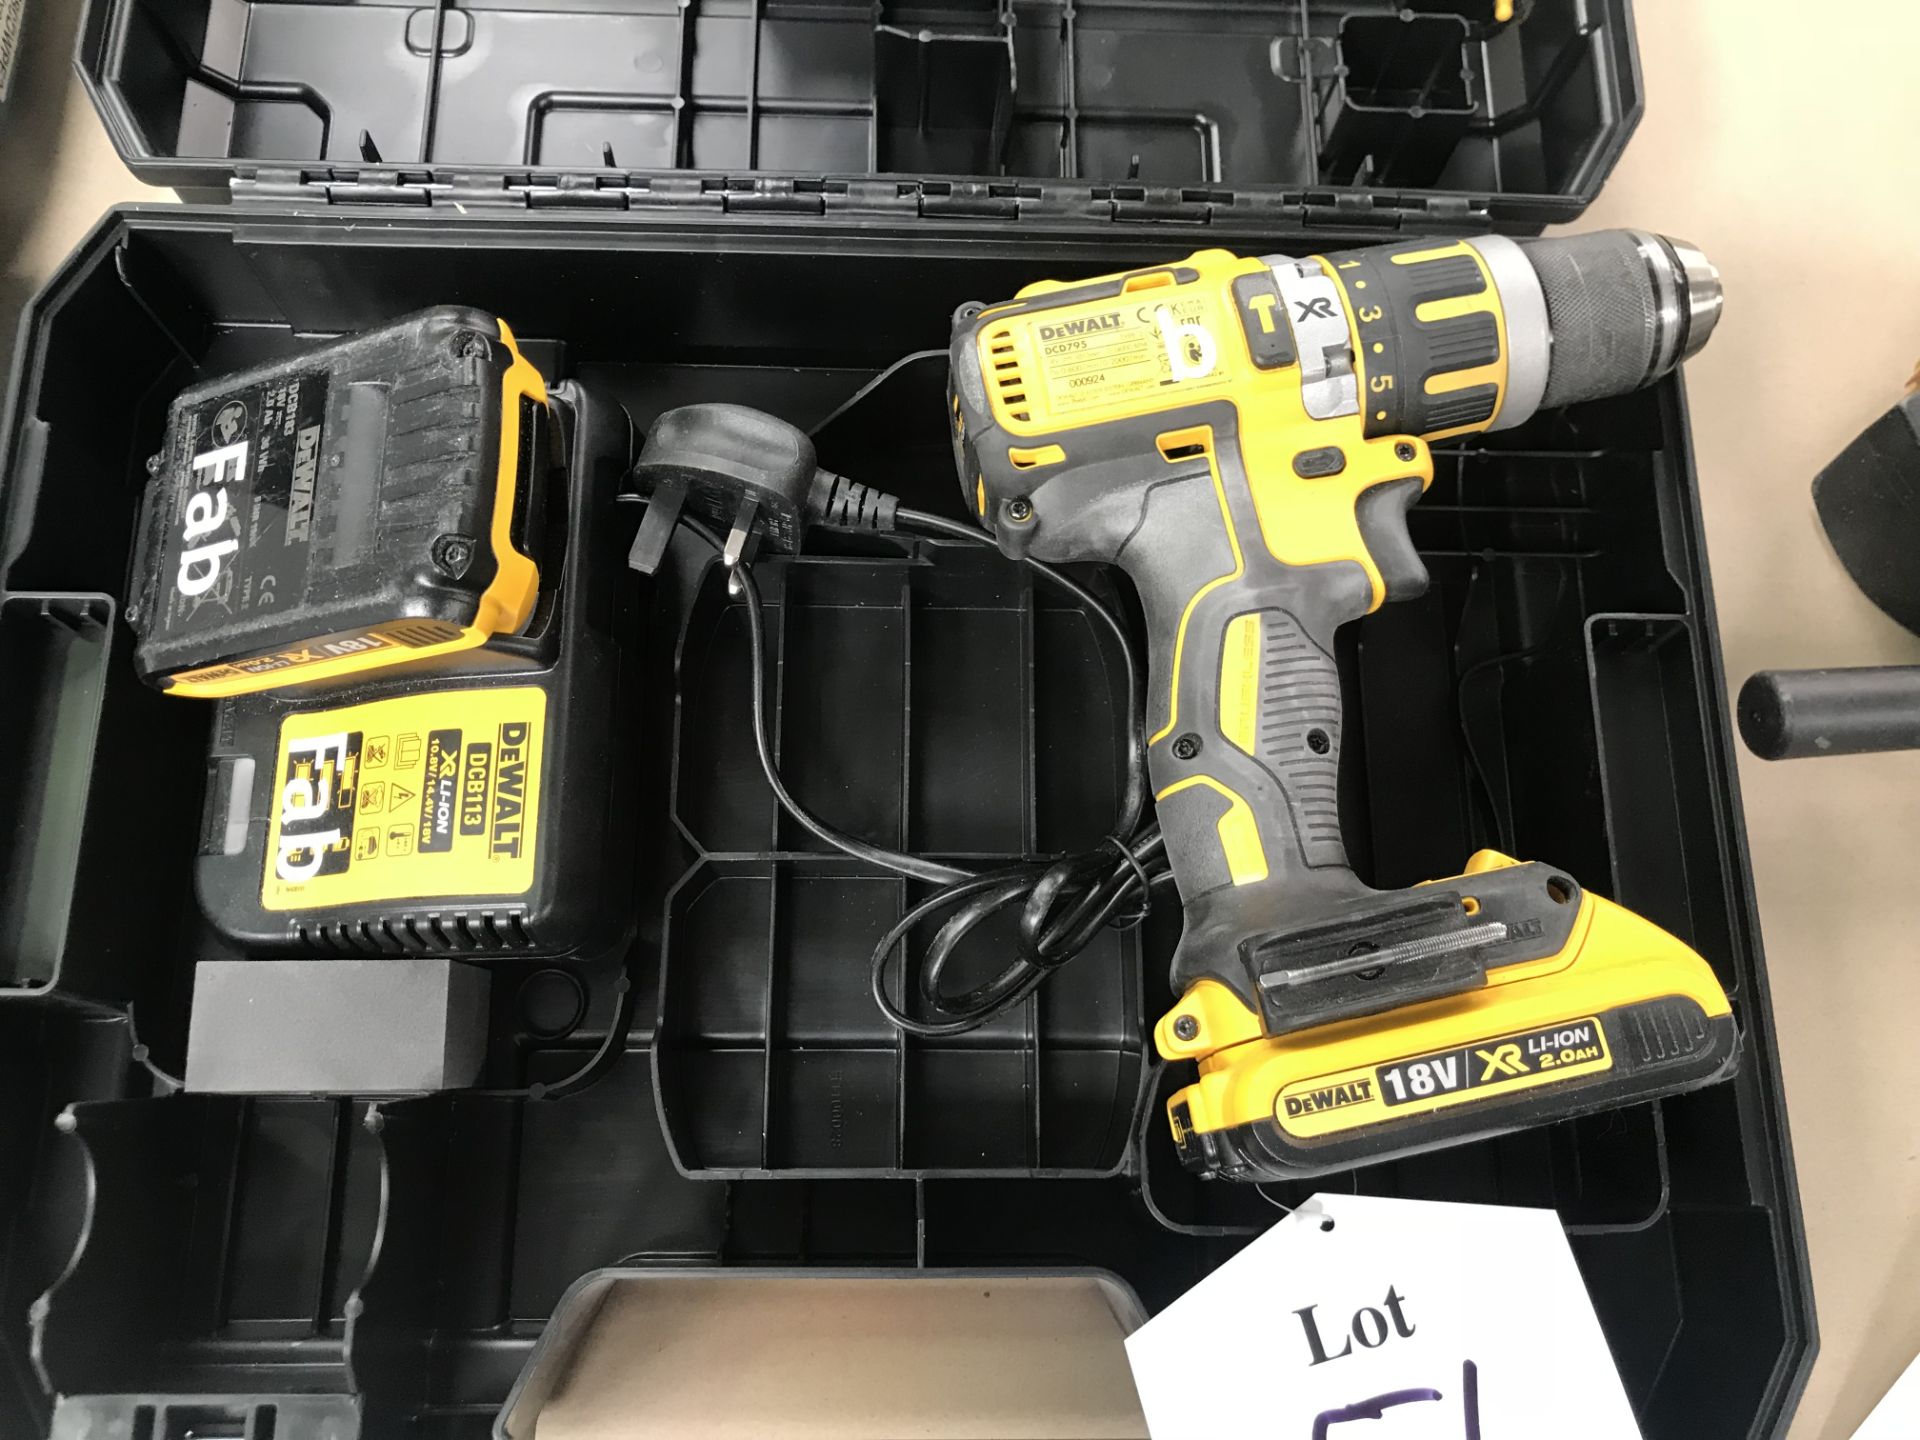 Dewalt DCD795 Brushless Combi Drill w/ Case, Charger & Spare Battery - Image 2 of 3